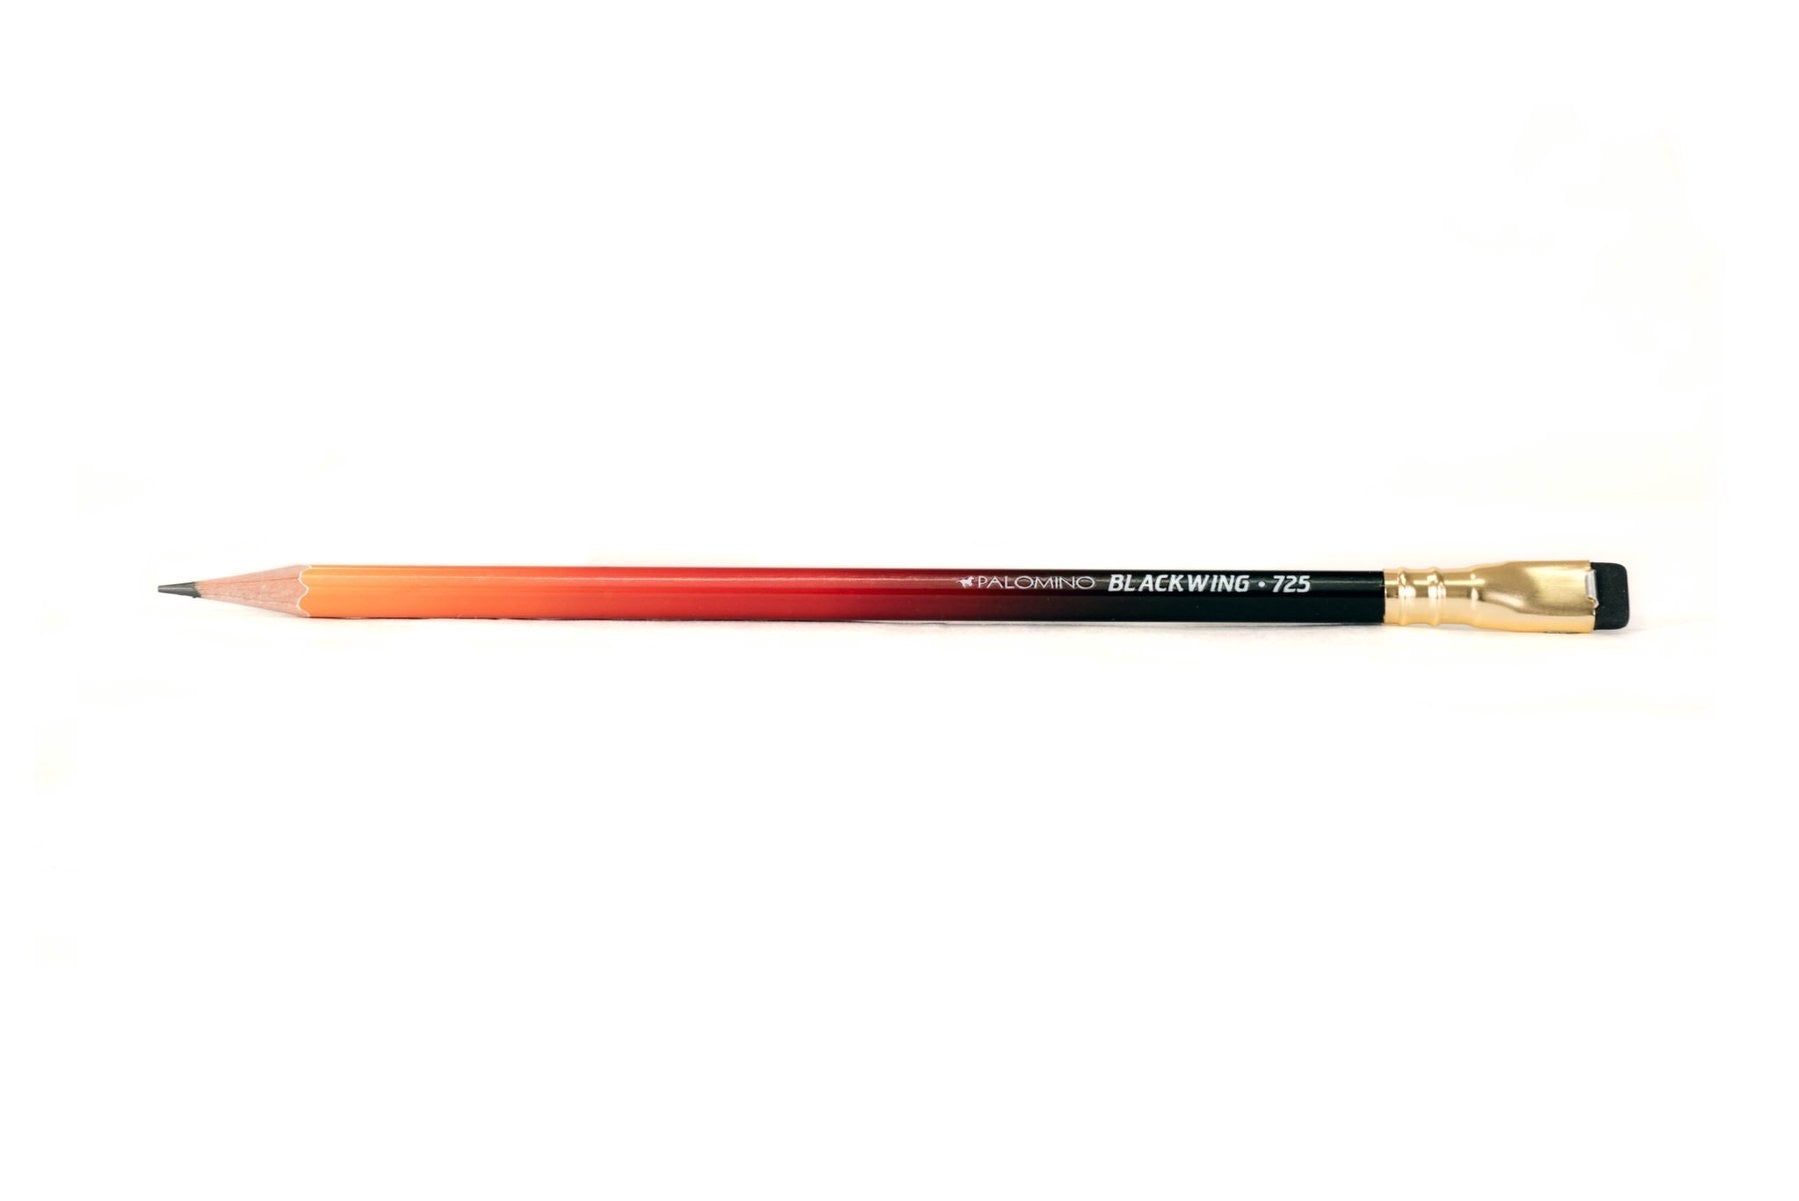 Blackwing Volume 725 limited edition